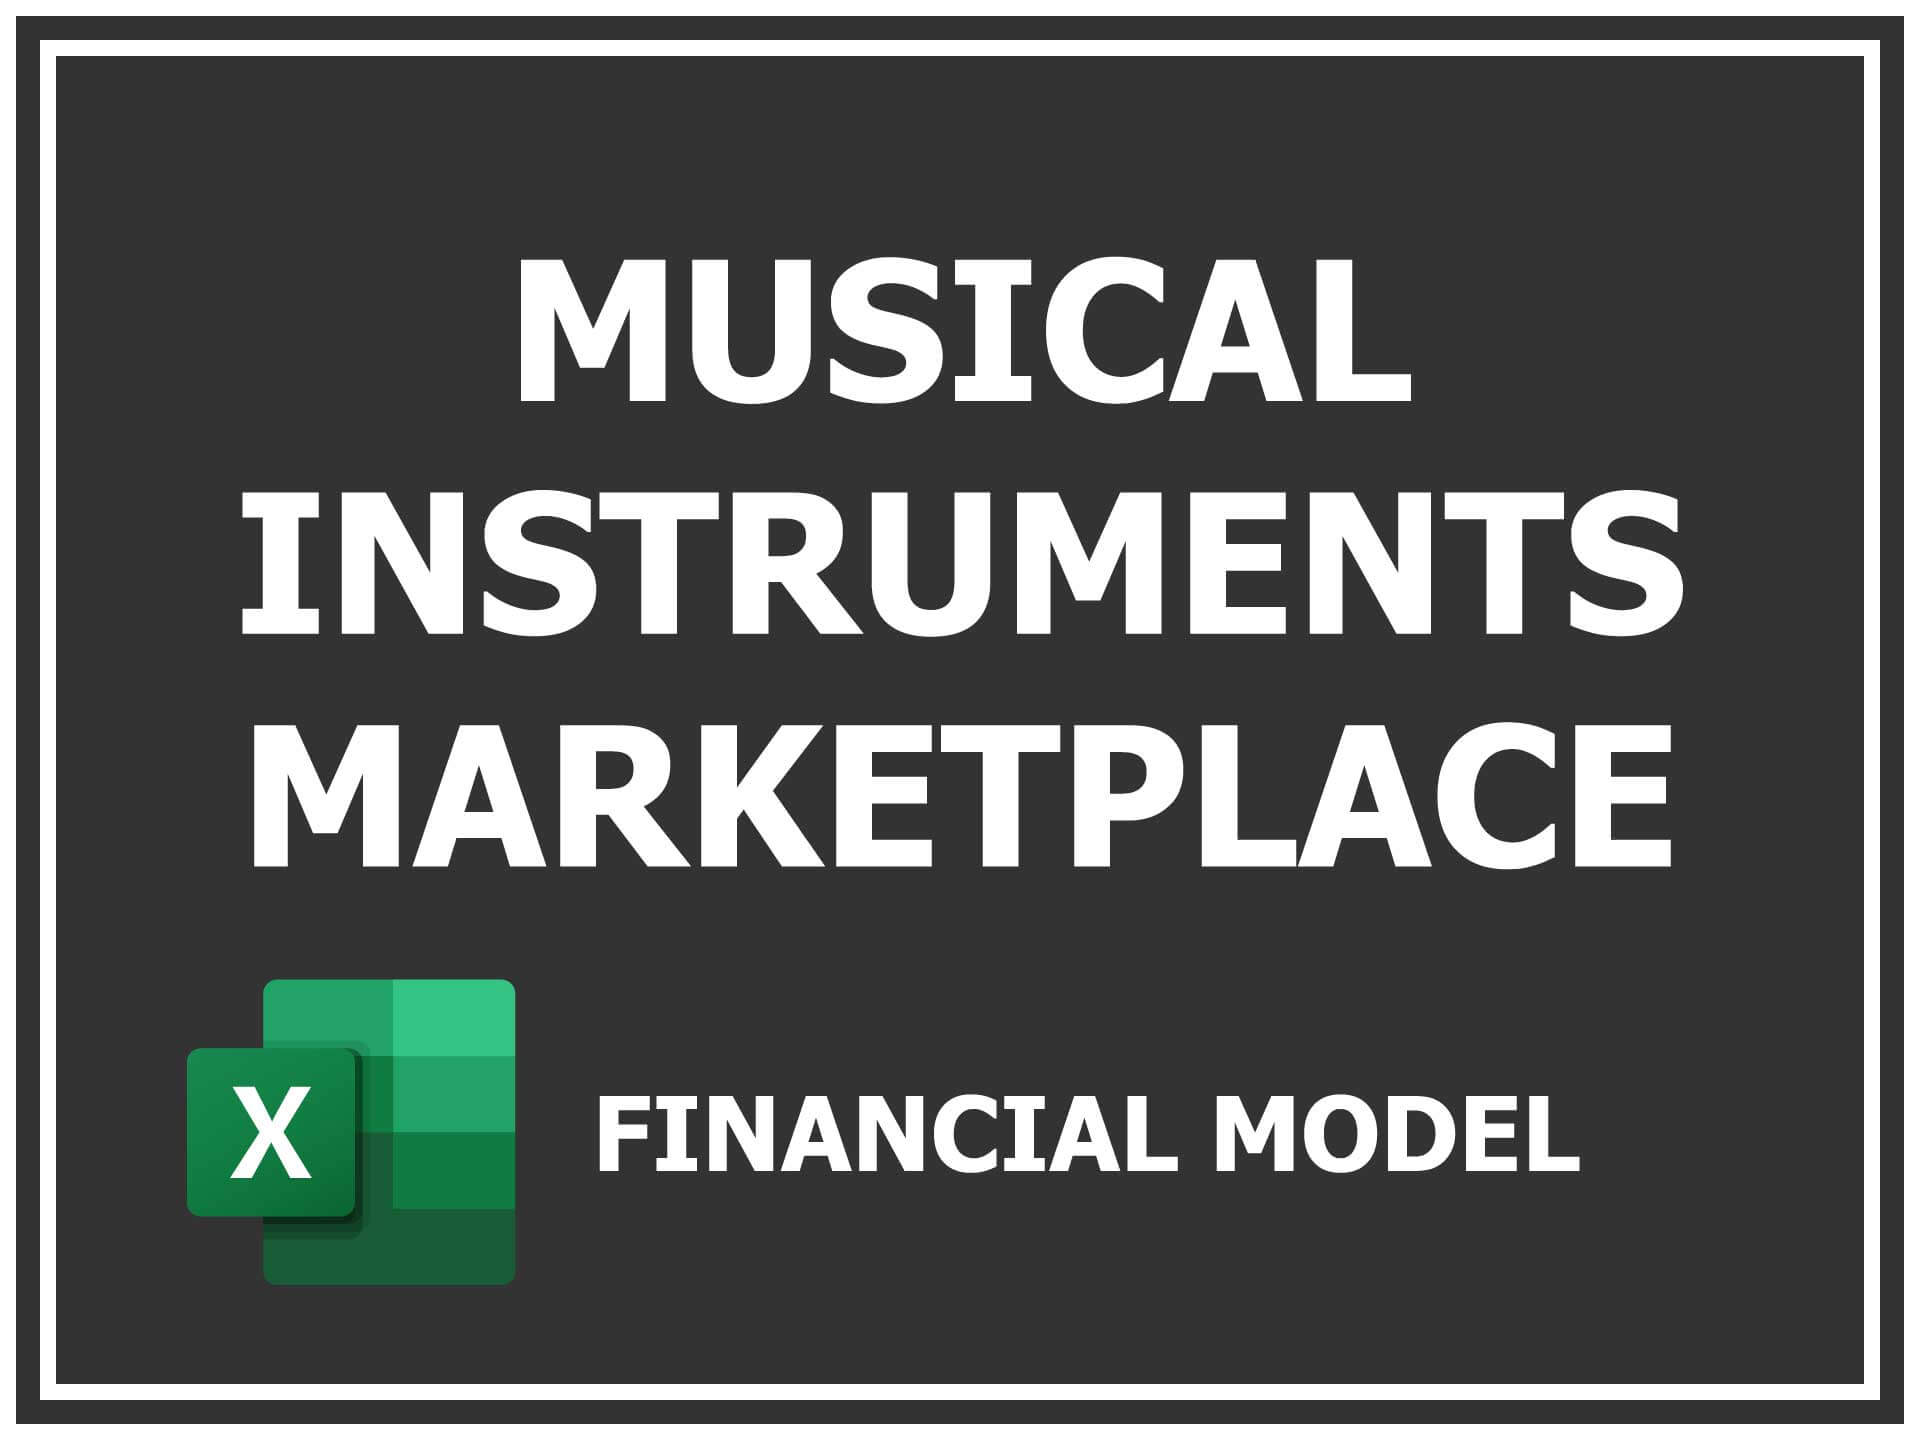 Musical Instruments Marketplace